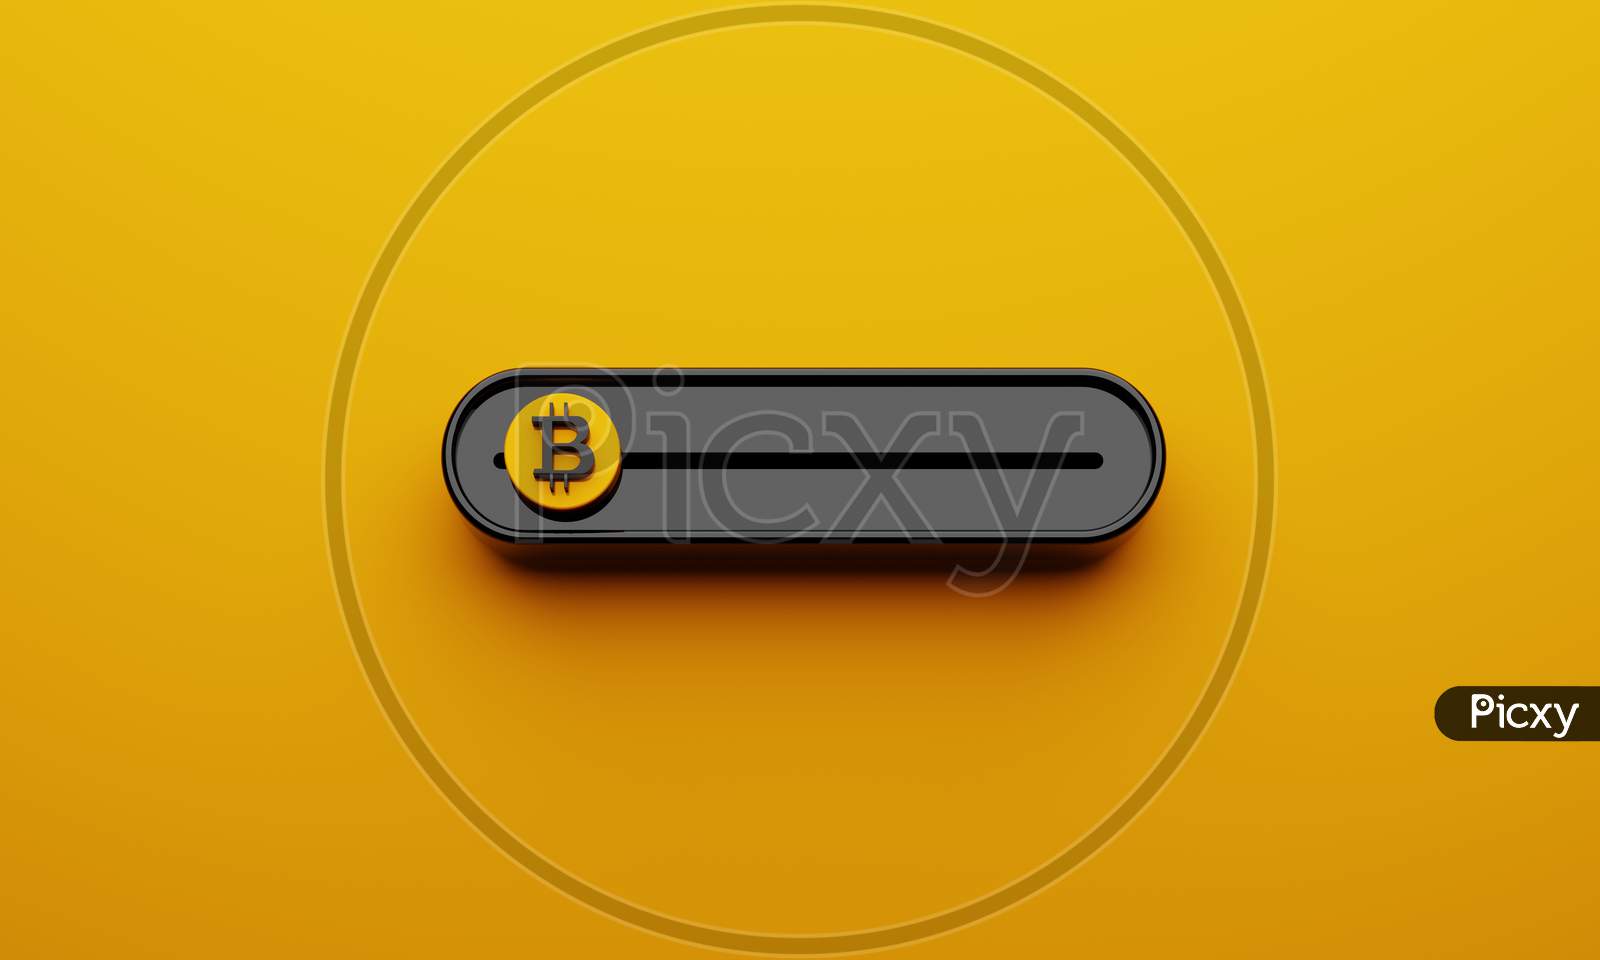 Black Crypto Currencies Bitcoin Slide Bar On Yellow Background. Slider For Making Profit By Sell Or Buy In Btc Theme. Economic And Business Investment Concept. 3D Illustration Rendering Graphic Design